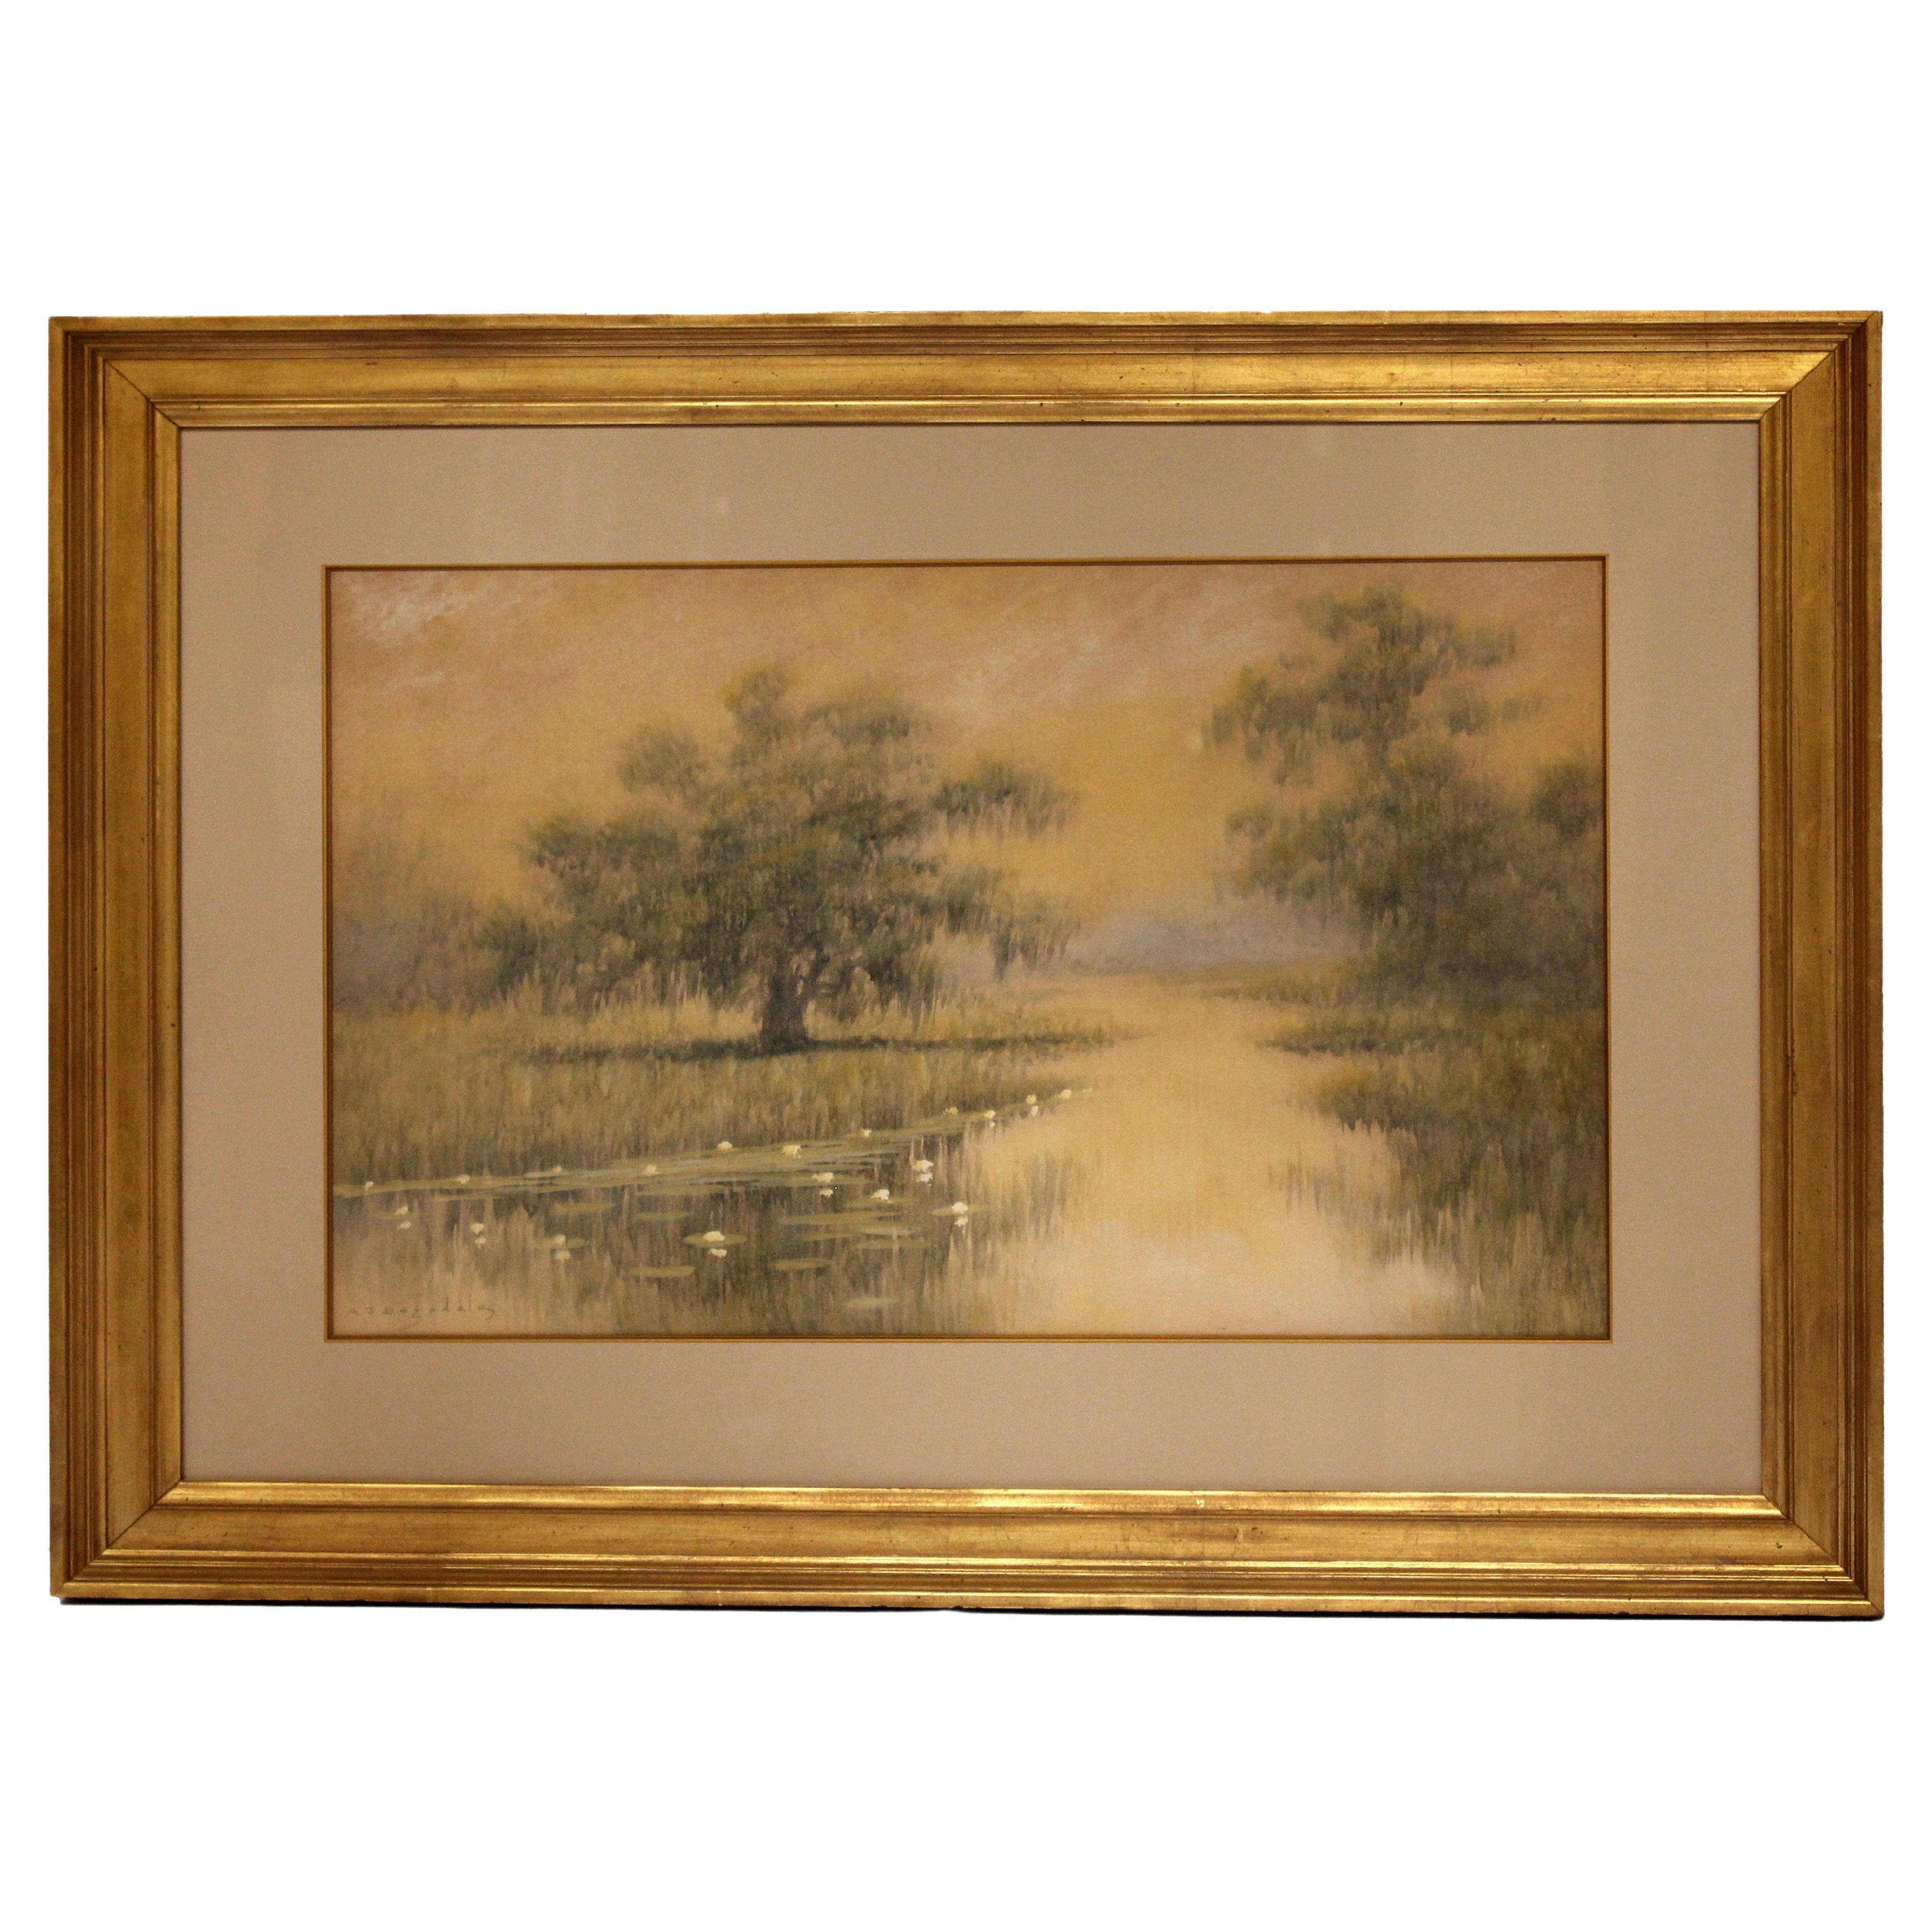 Circa 1915-20 "Live Oaks and Water Lillies on the on the Bayou", by Drysdale For Sale